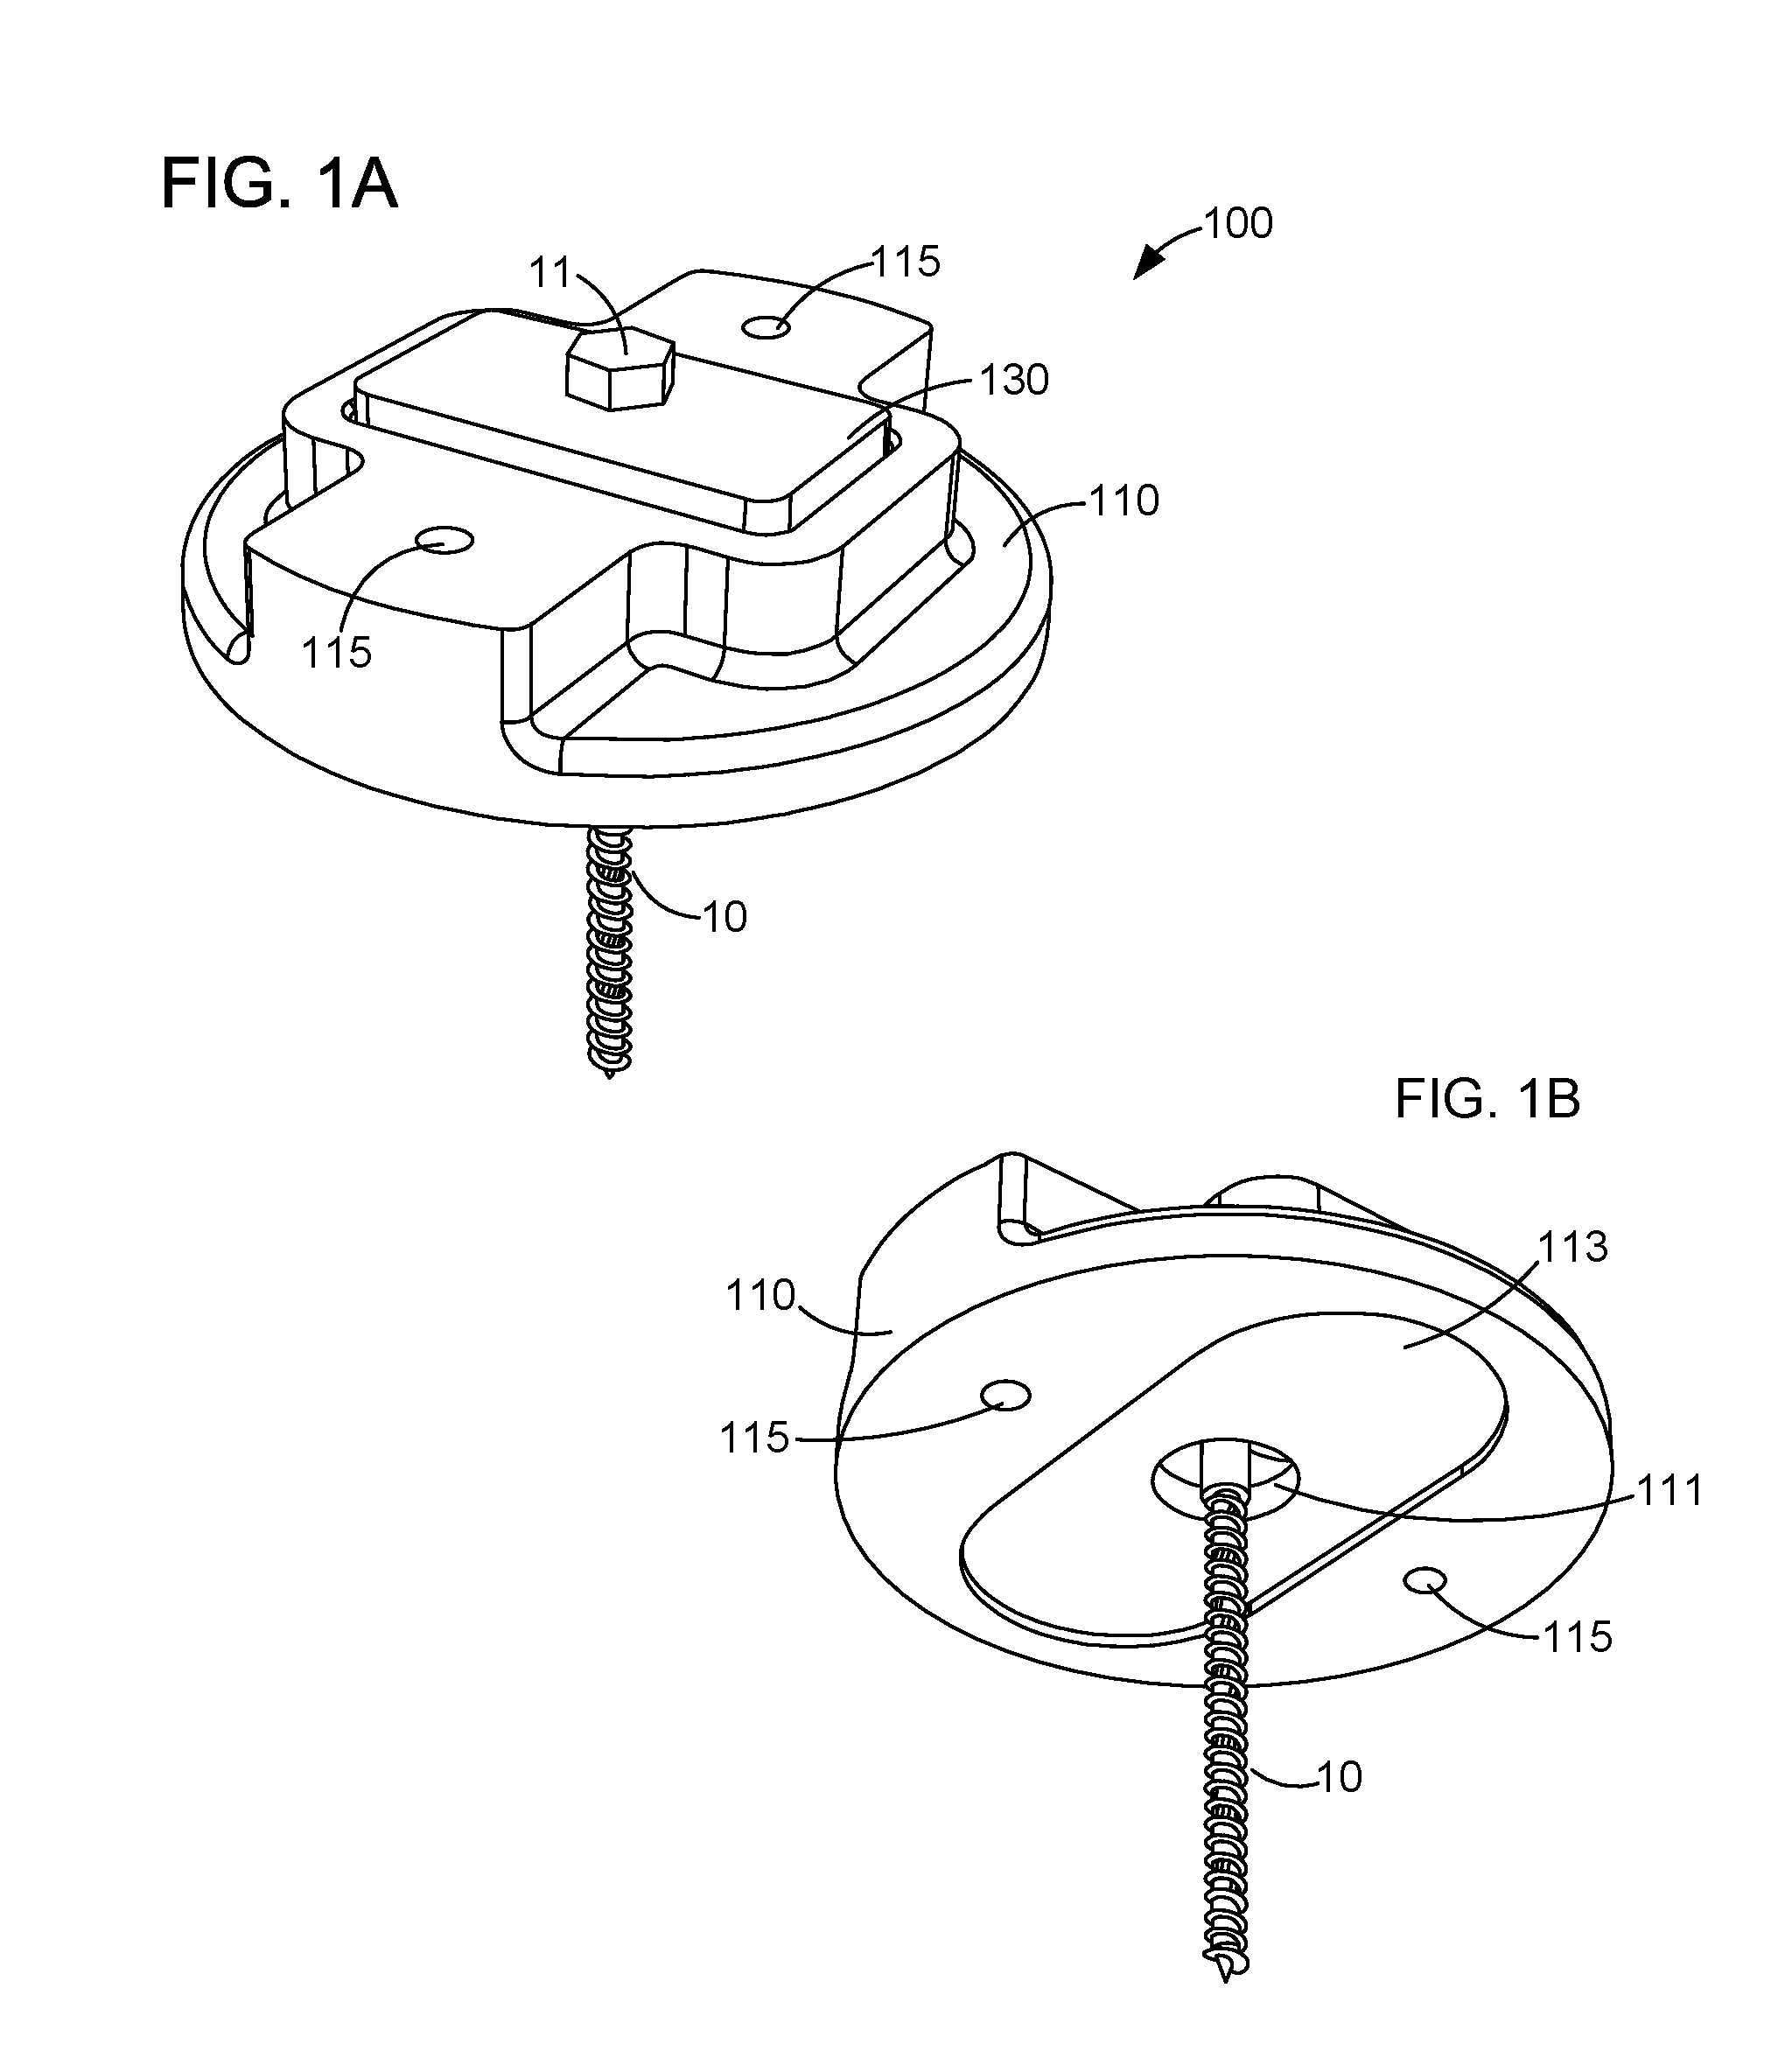 Photovoltaic mounting system and devices